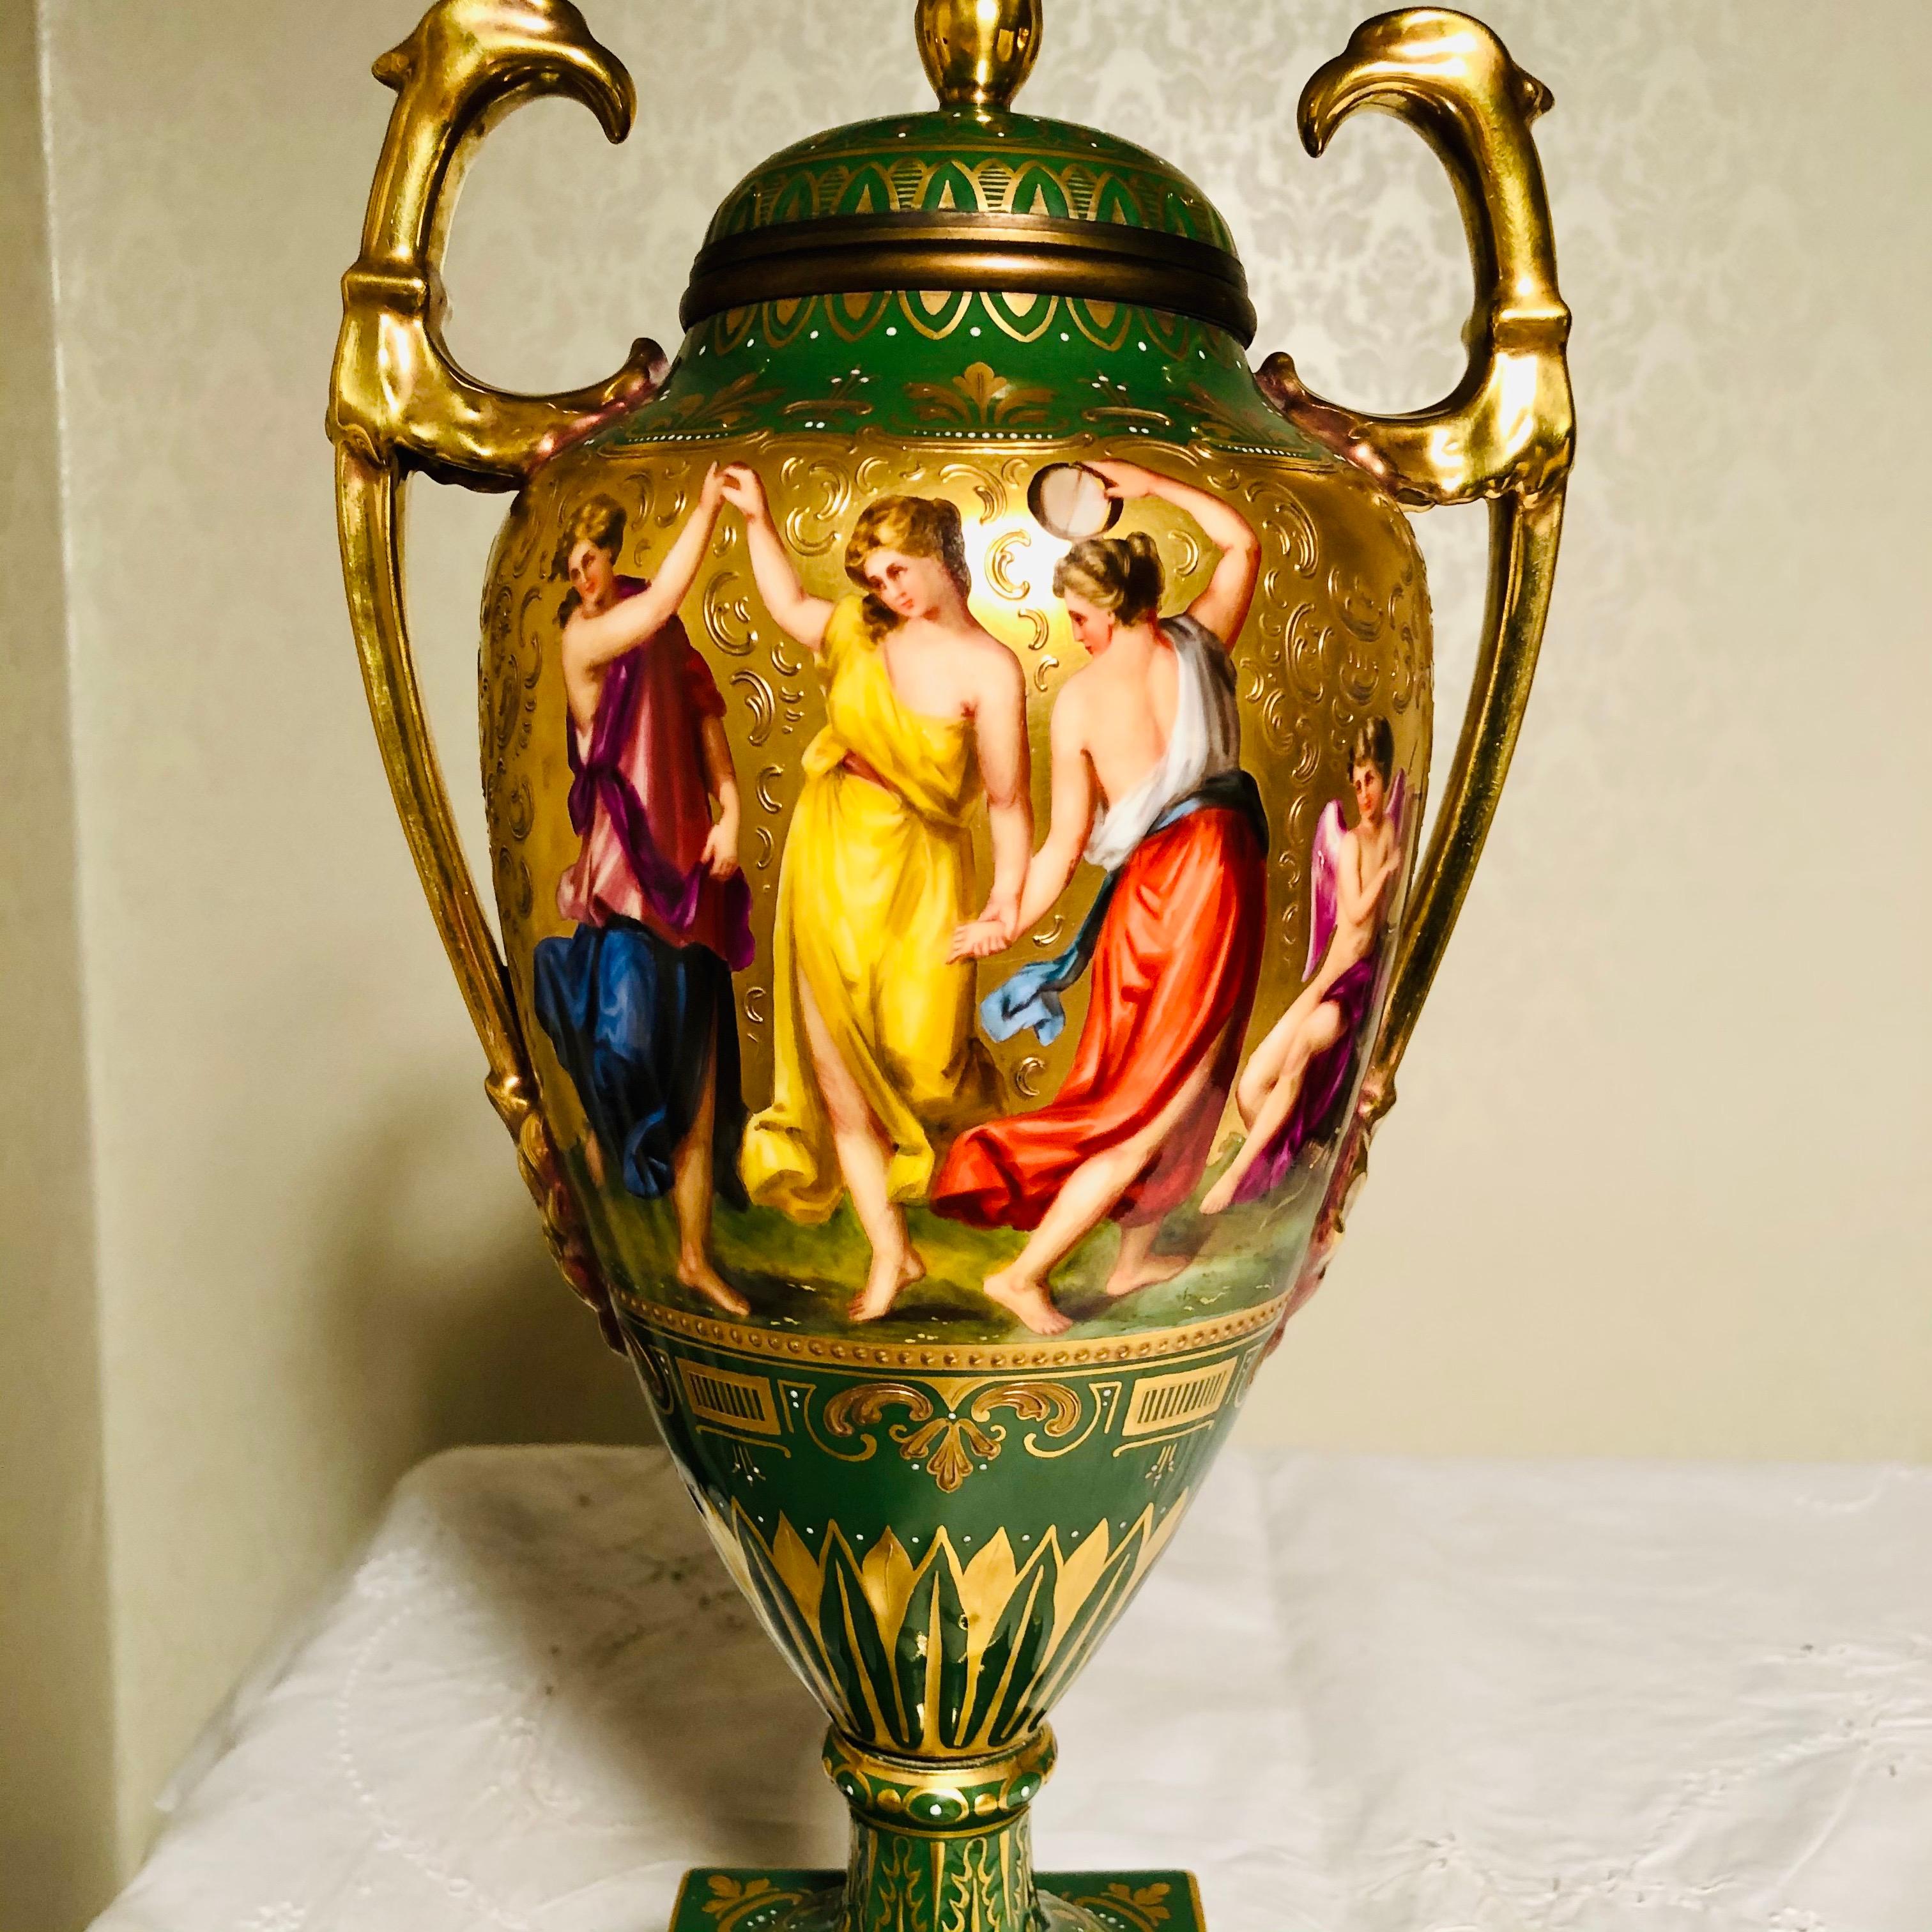 Hand-Painted “Royal Vienna” Covered Urn Signed A. Heer with Exquisite Paintings on Both Sides For Sale